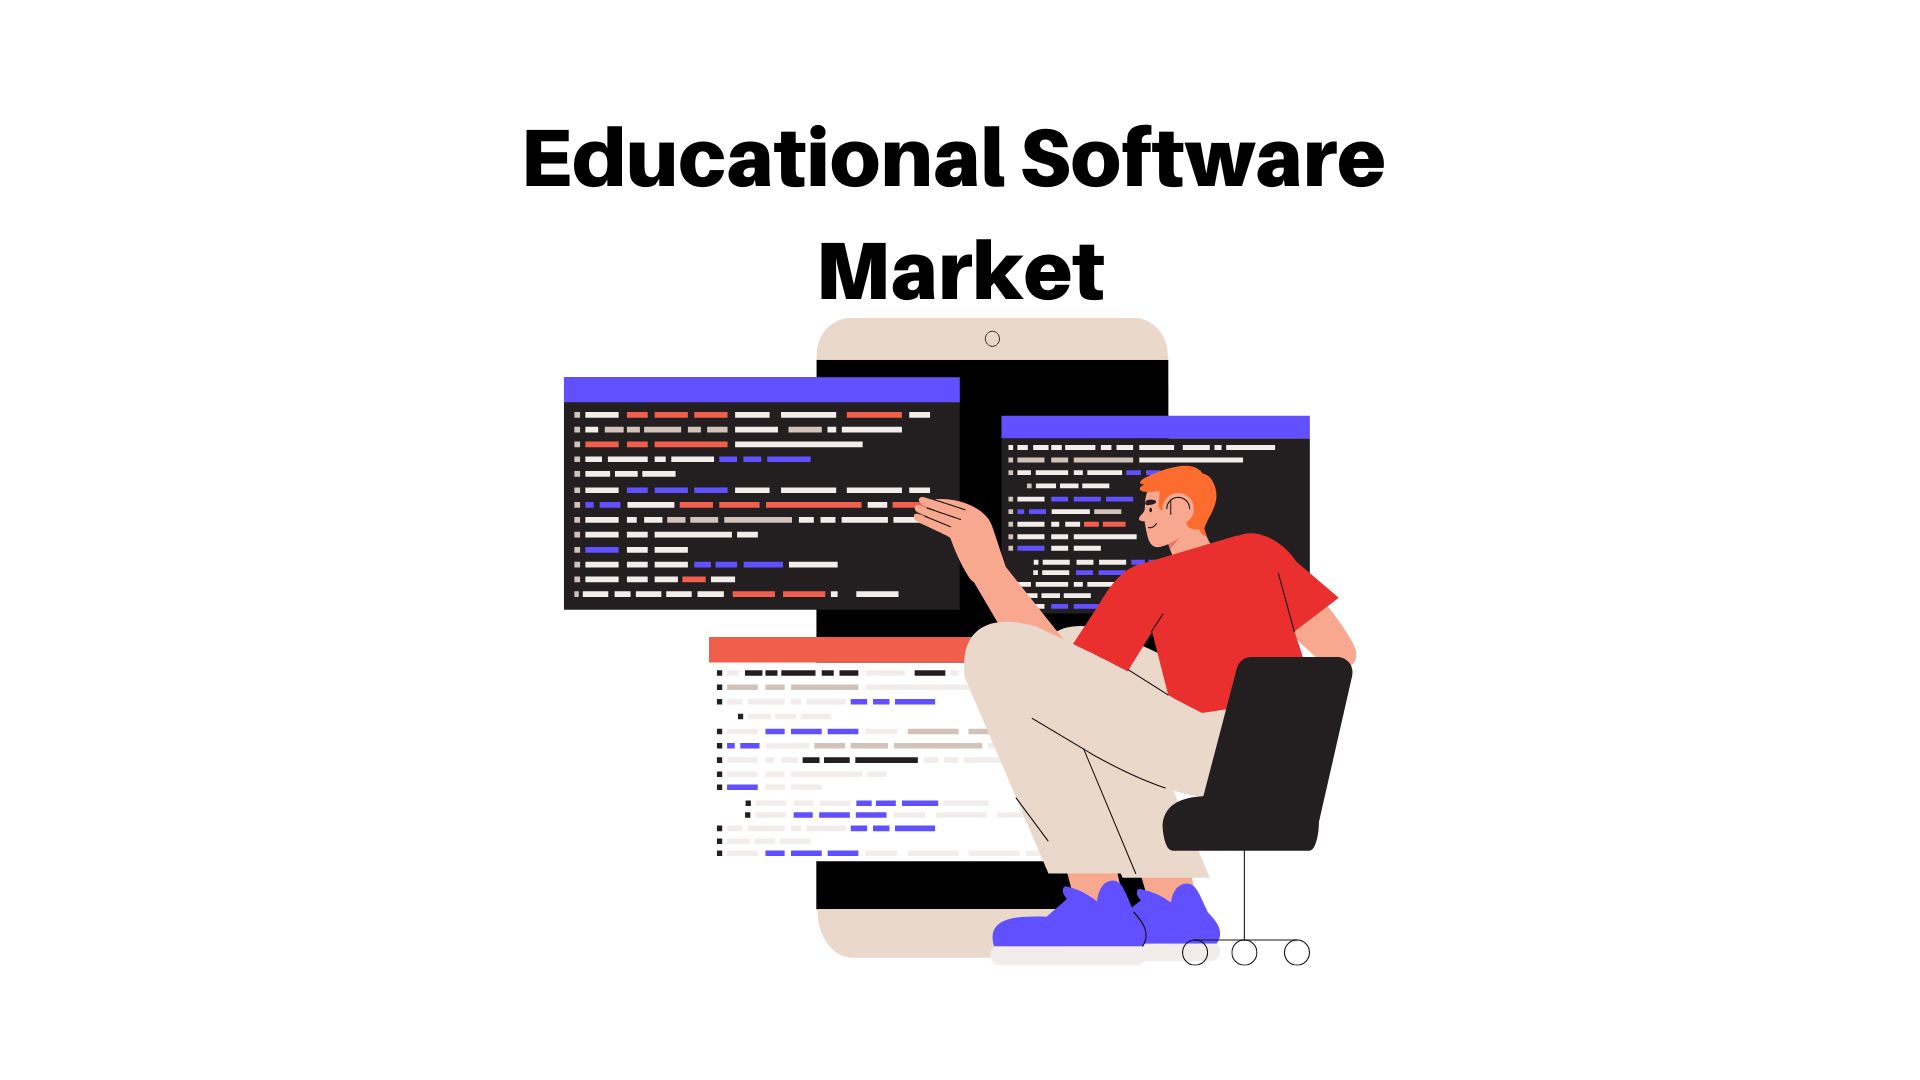 Educational Software Market Sales to Expand at Remarkable 18.1% CAGR through 2032